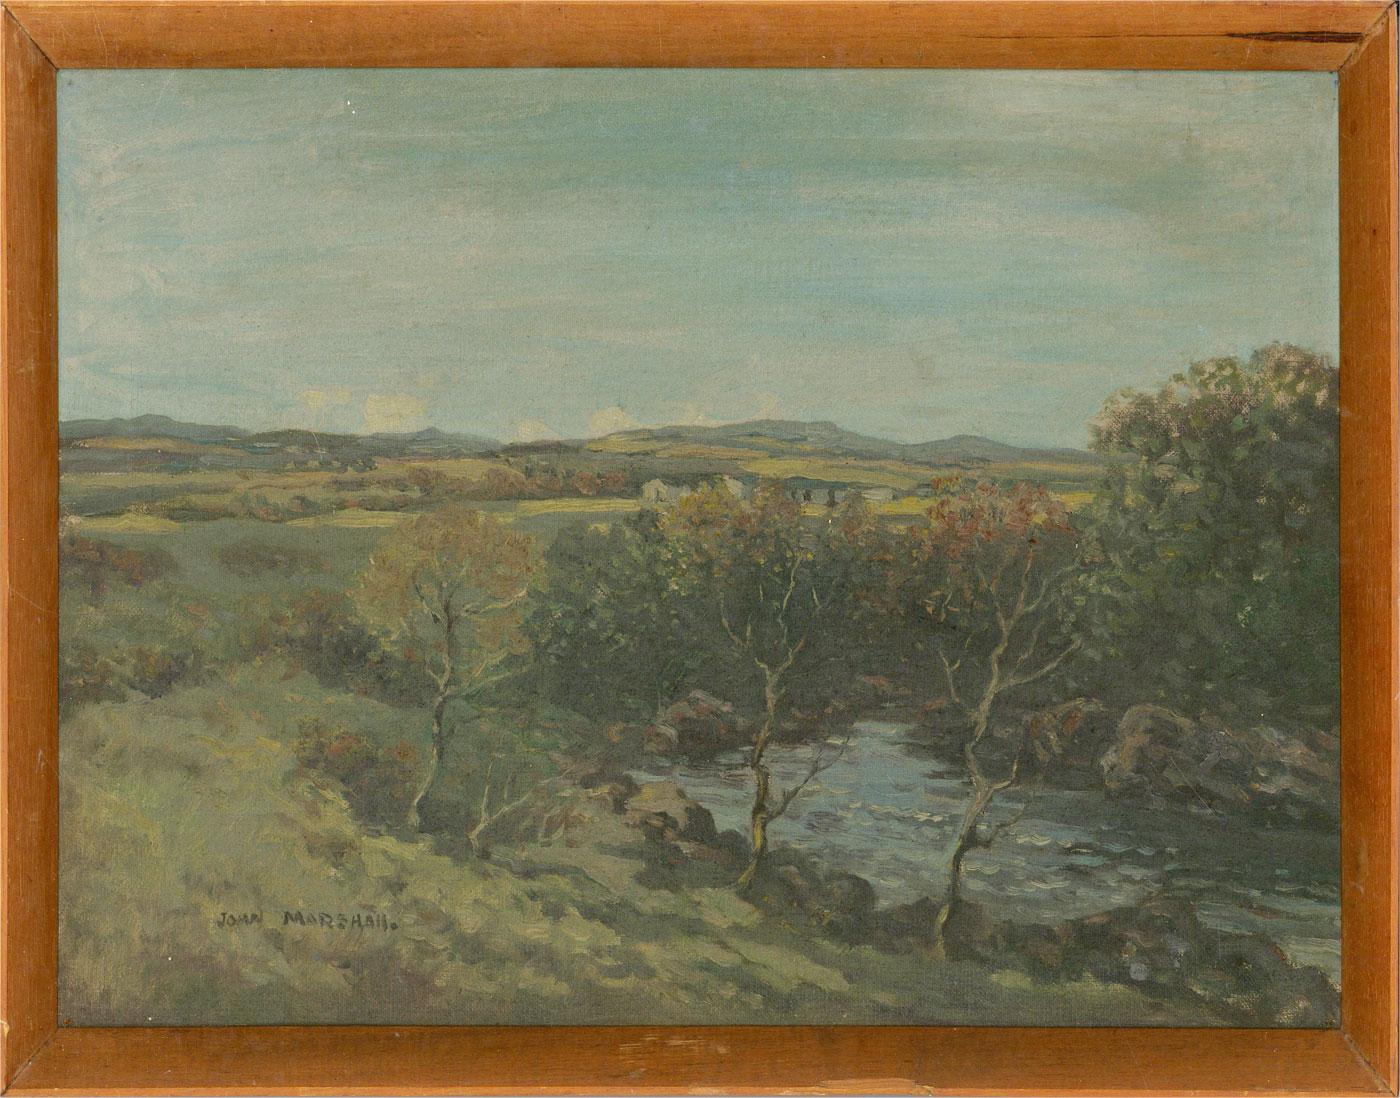 A pleasant oil painting on canvas by John Marshall, depicting a countryside landscape with endless green fields and hills in the background. The artist's use of rapid brush strokes and varying paint application adds a scene of movement to the scene.